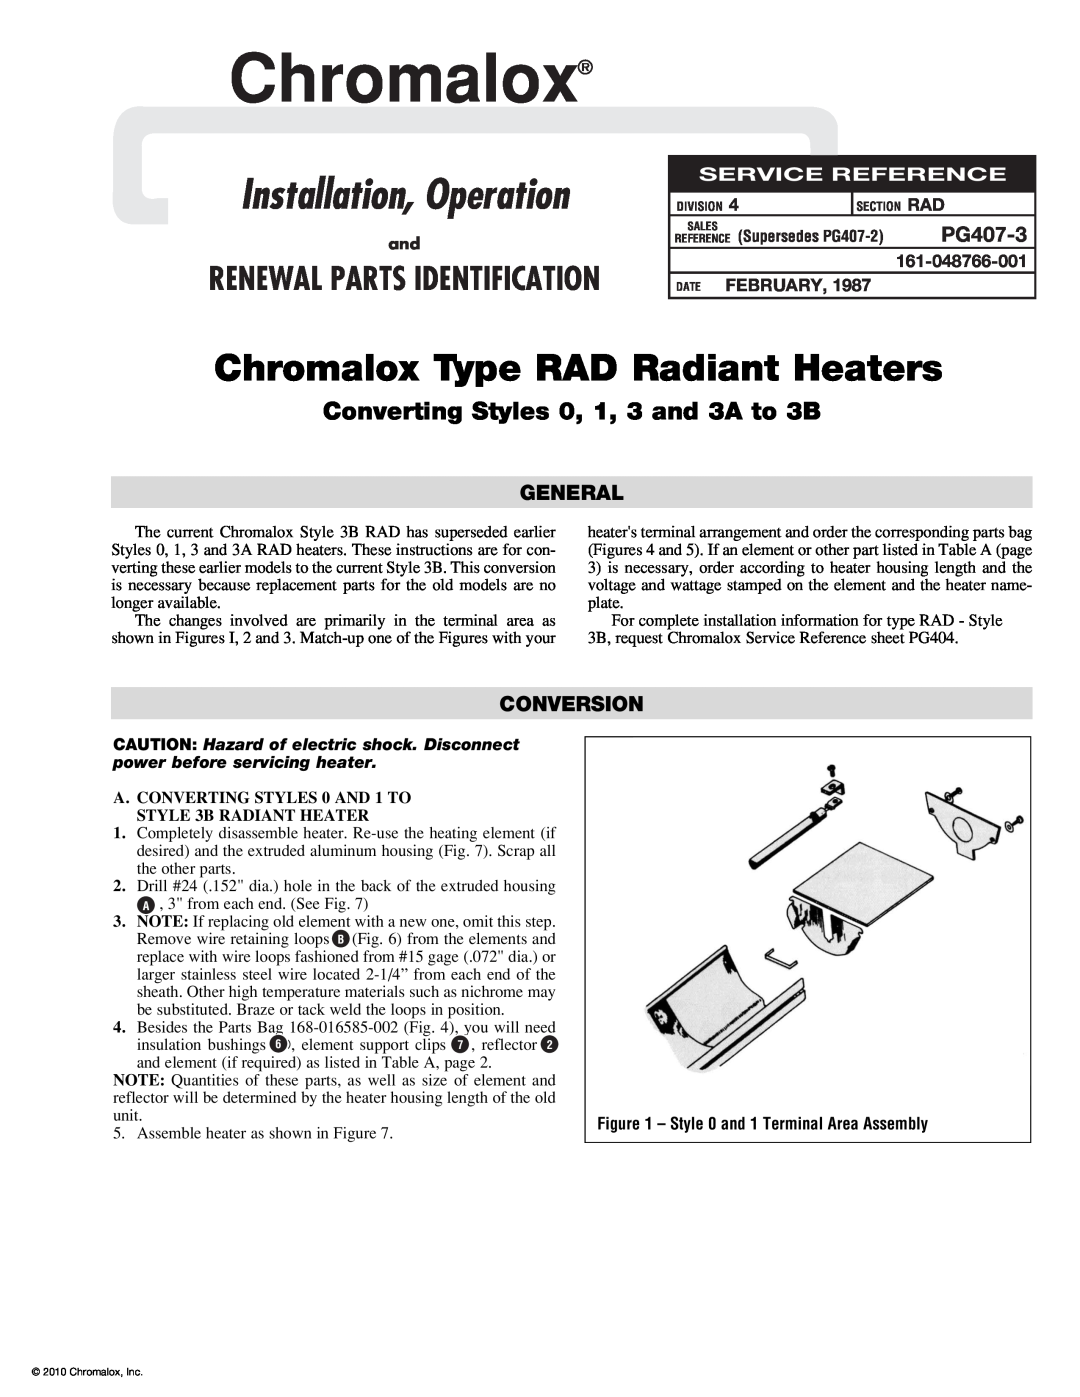 Chromalox PG407-3 manual General, Conversion, Style 0 and 1 Terminal Area Assembly, Chromalox, Installation, Operation 